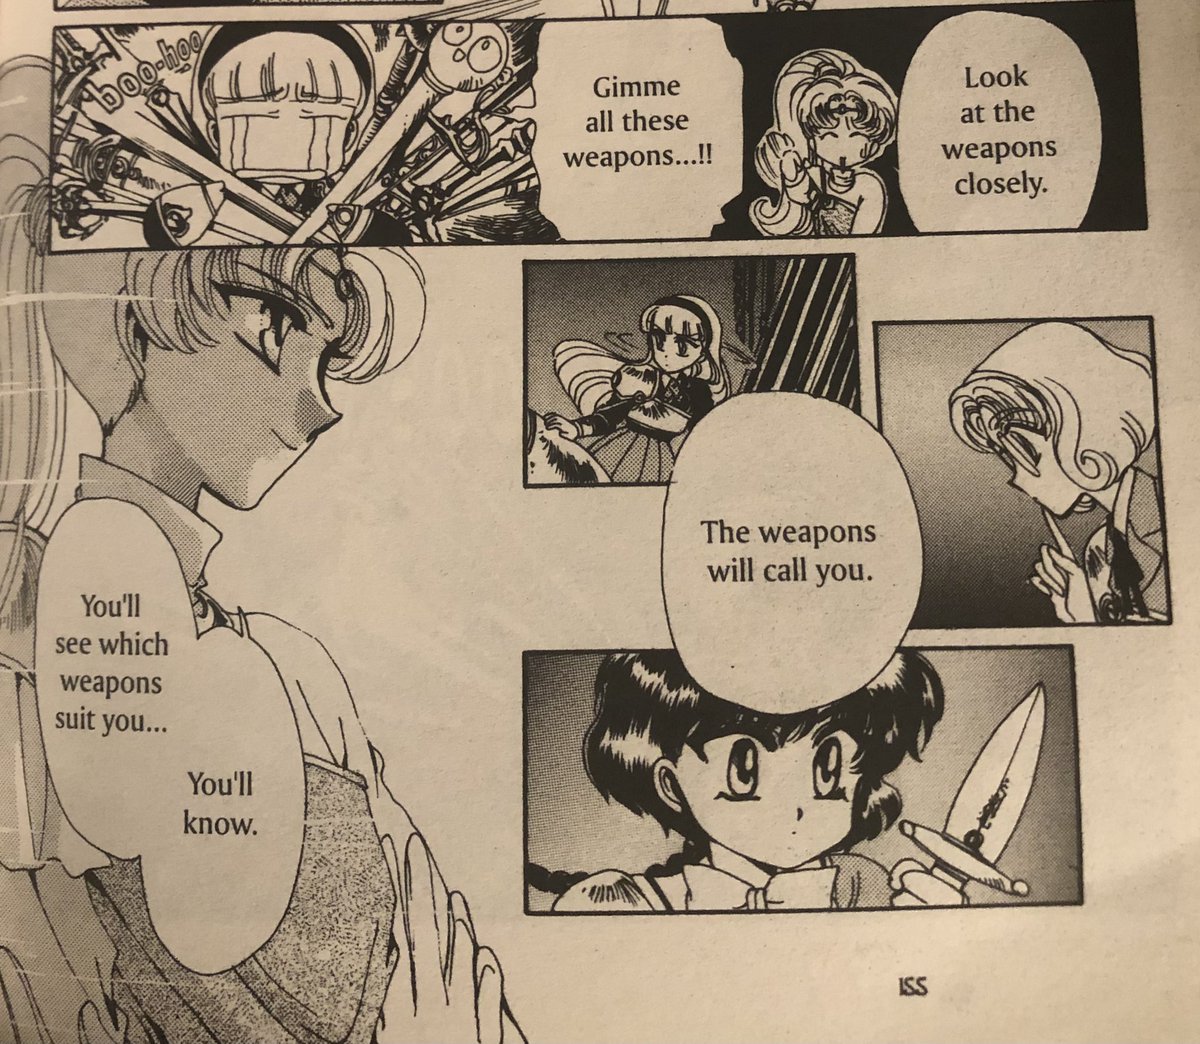 More plot-vital outfit lore. I also want to call myself out, here - I know exactly where I got the description for this Small Sword which is the size of a Large Dagger. And that would be... my garbage flipped copy of Magic Knight Rayearth volume 1 from Waldenbooks.